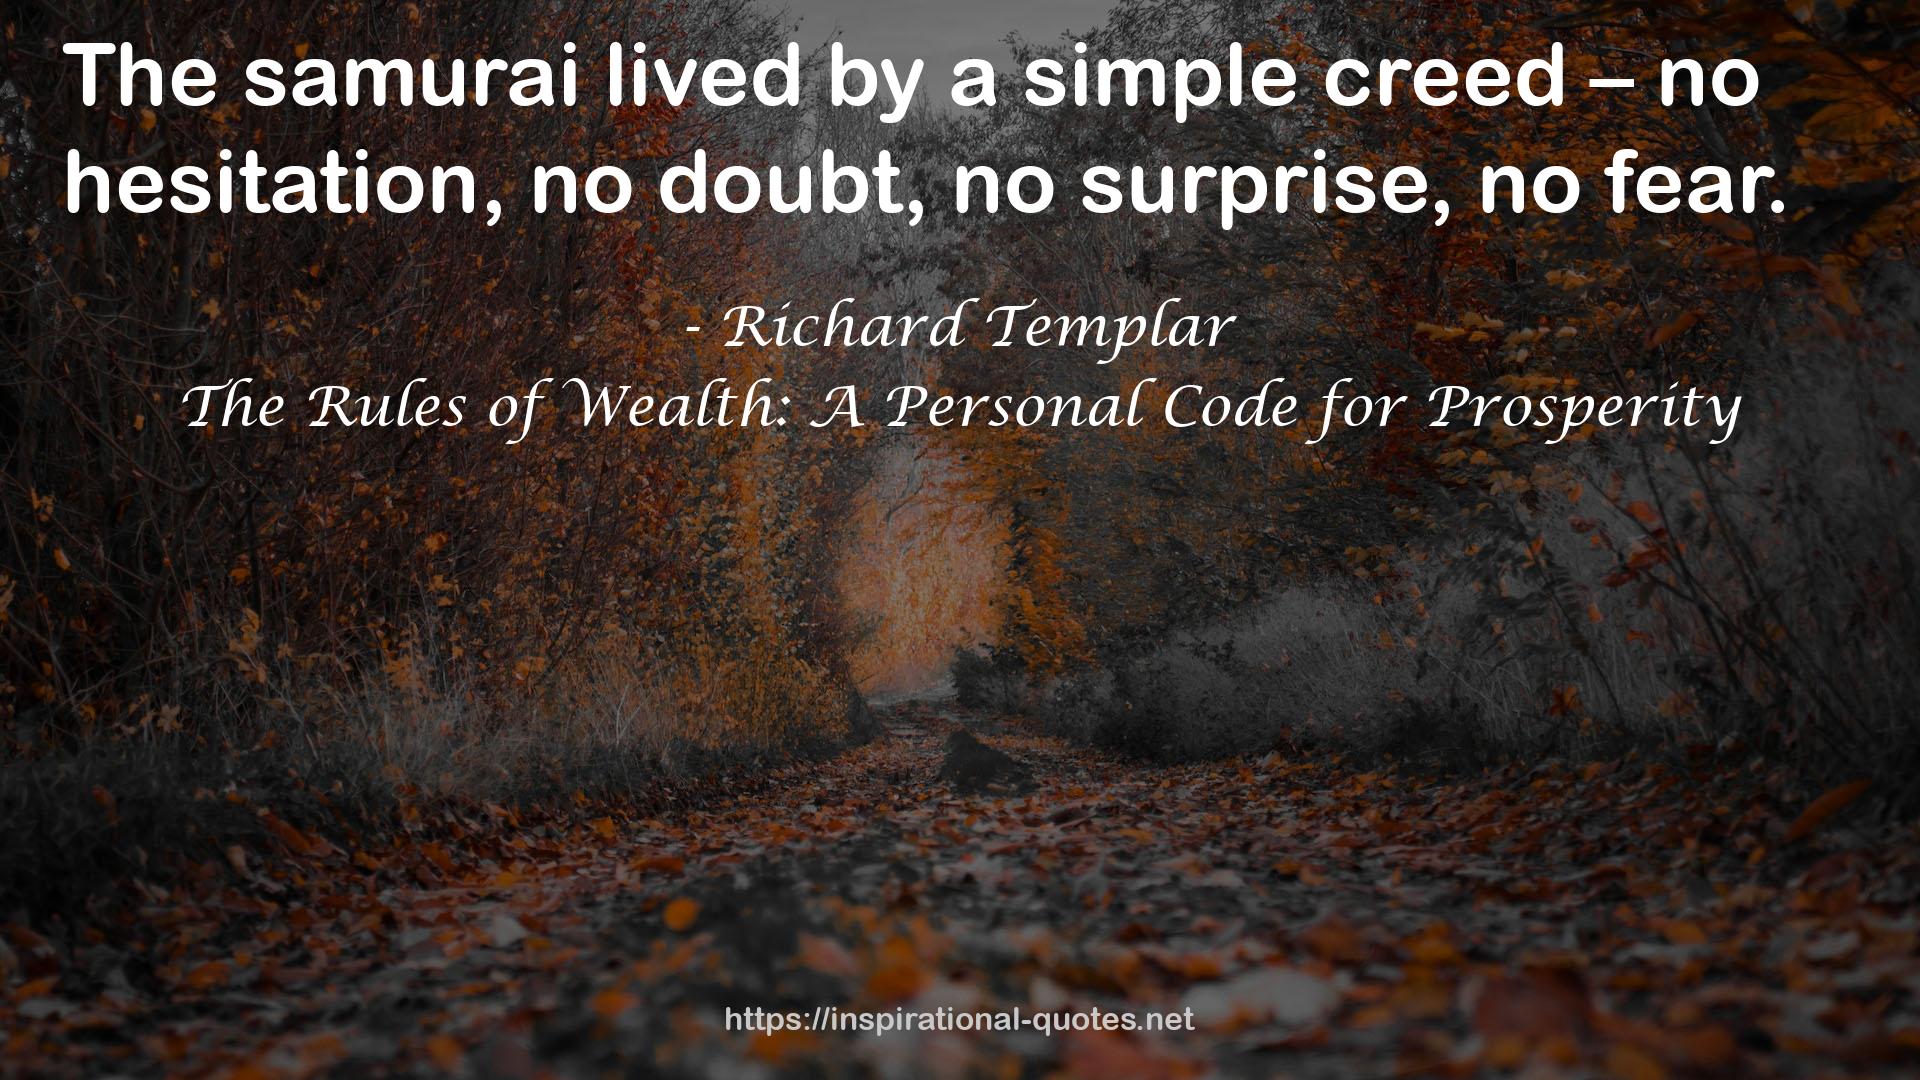 The Rules of Wealth: A Personal Code for Prosperity QUOTES